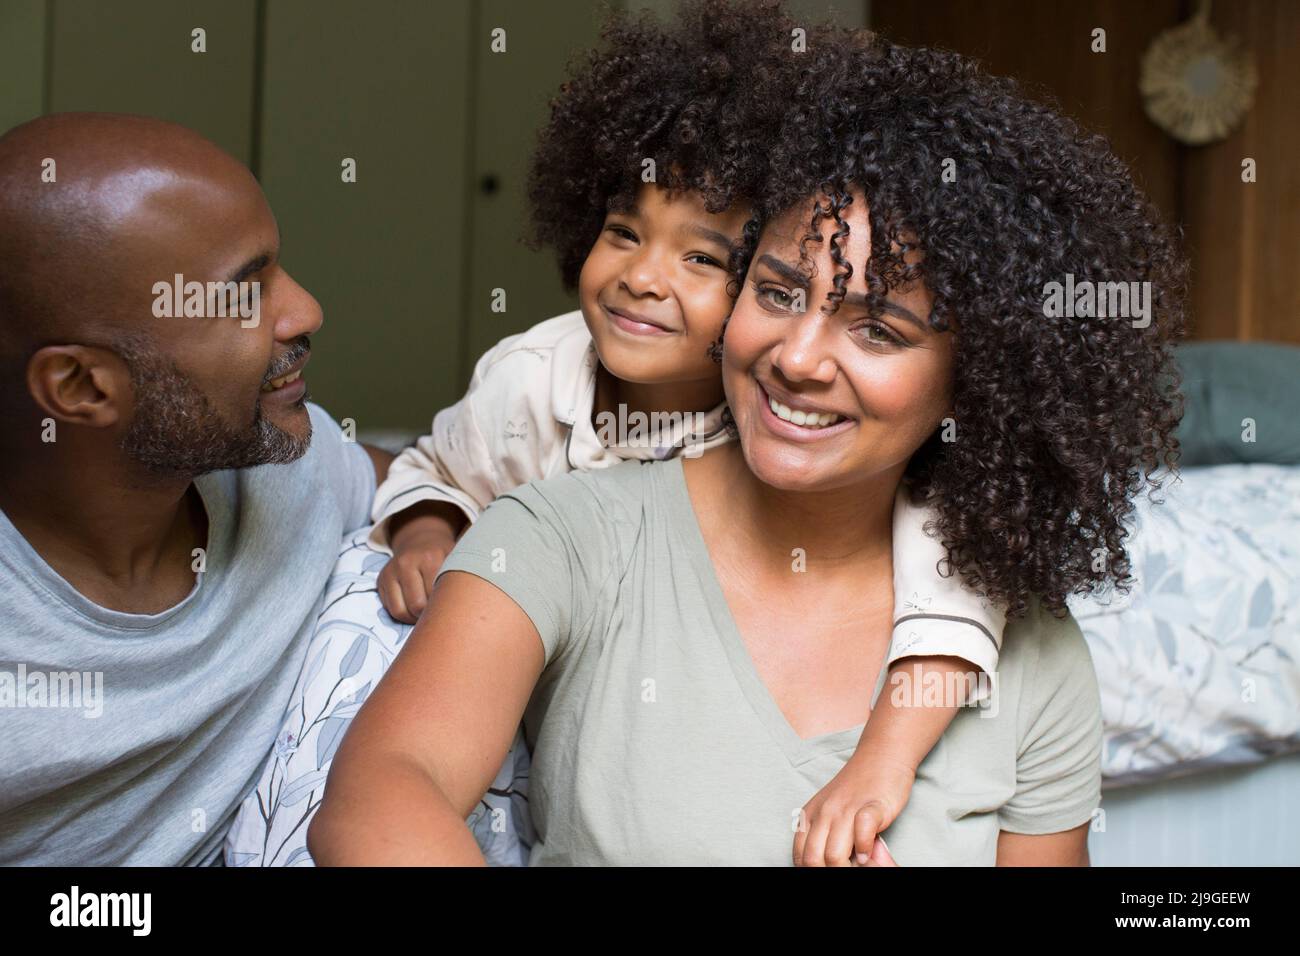 Smiling family sitting together on bed Stock Photo